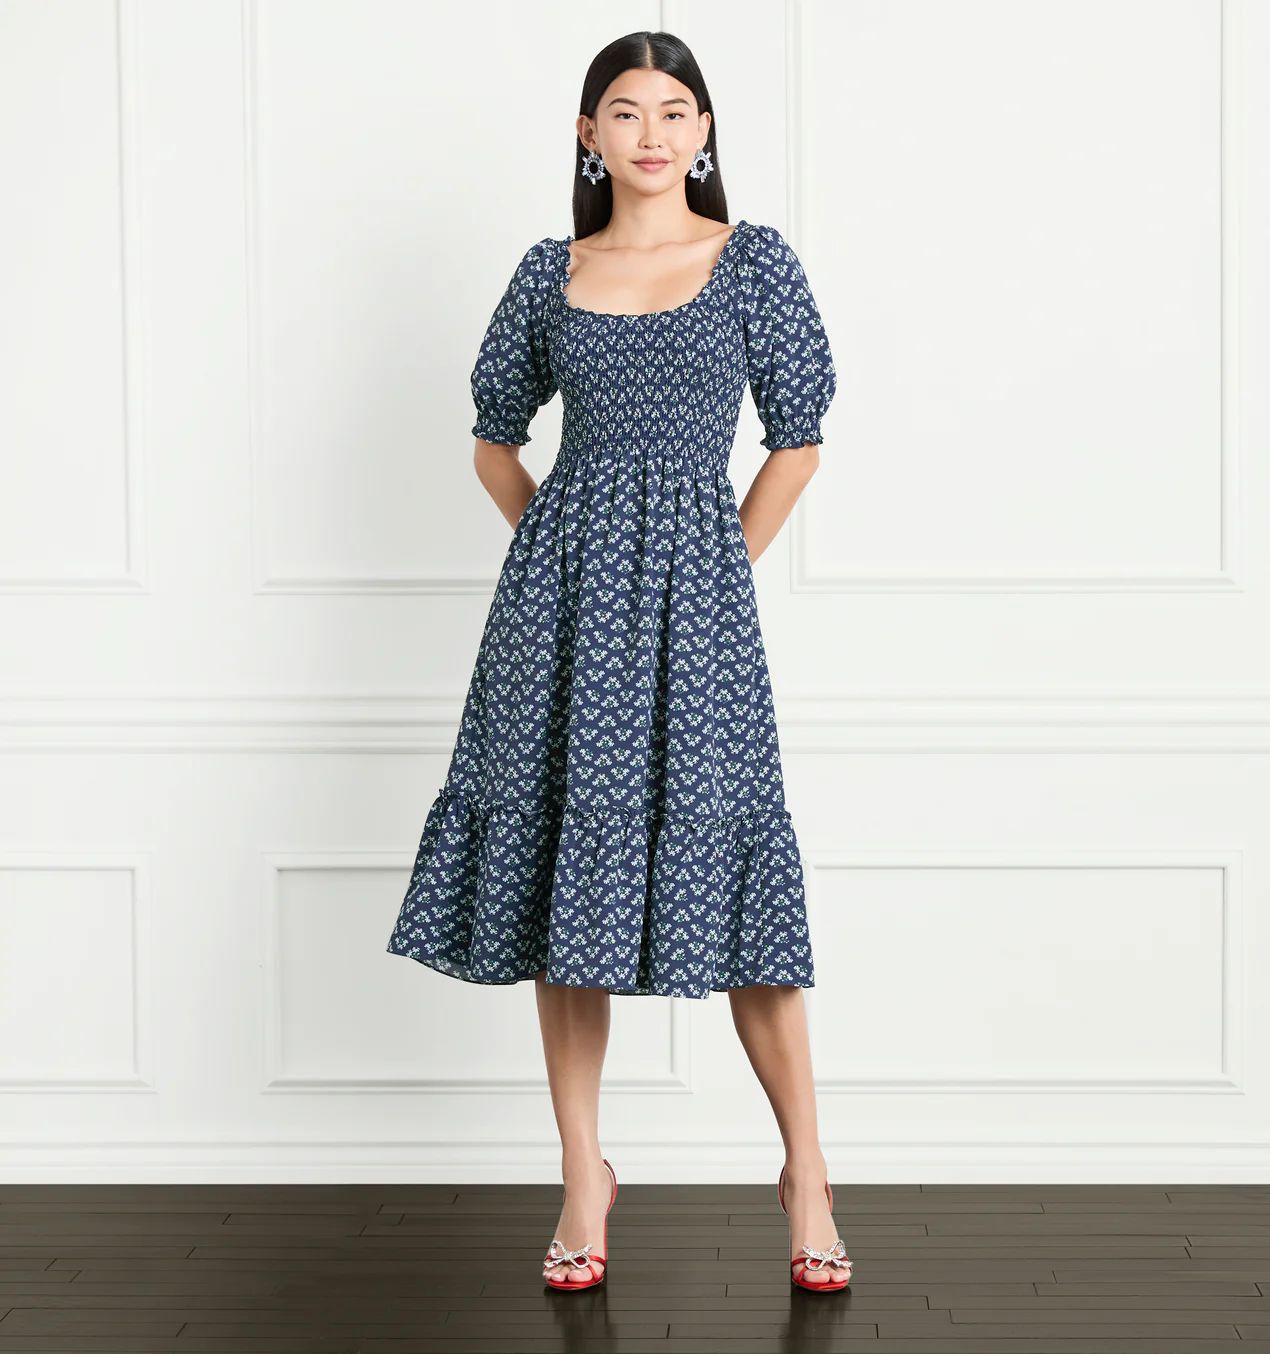 The Louisa Nap Dress - Posy Navy Crepe | Hill House Home